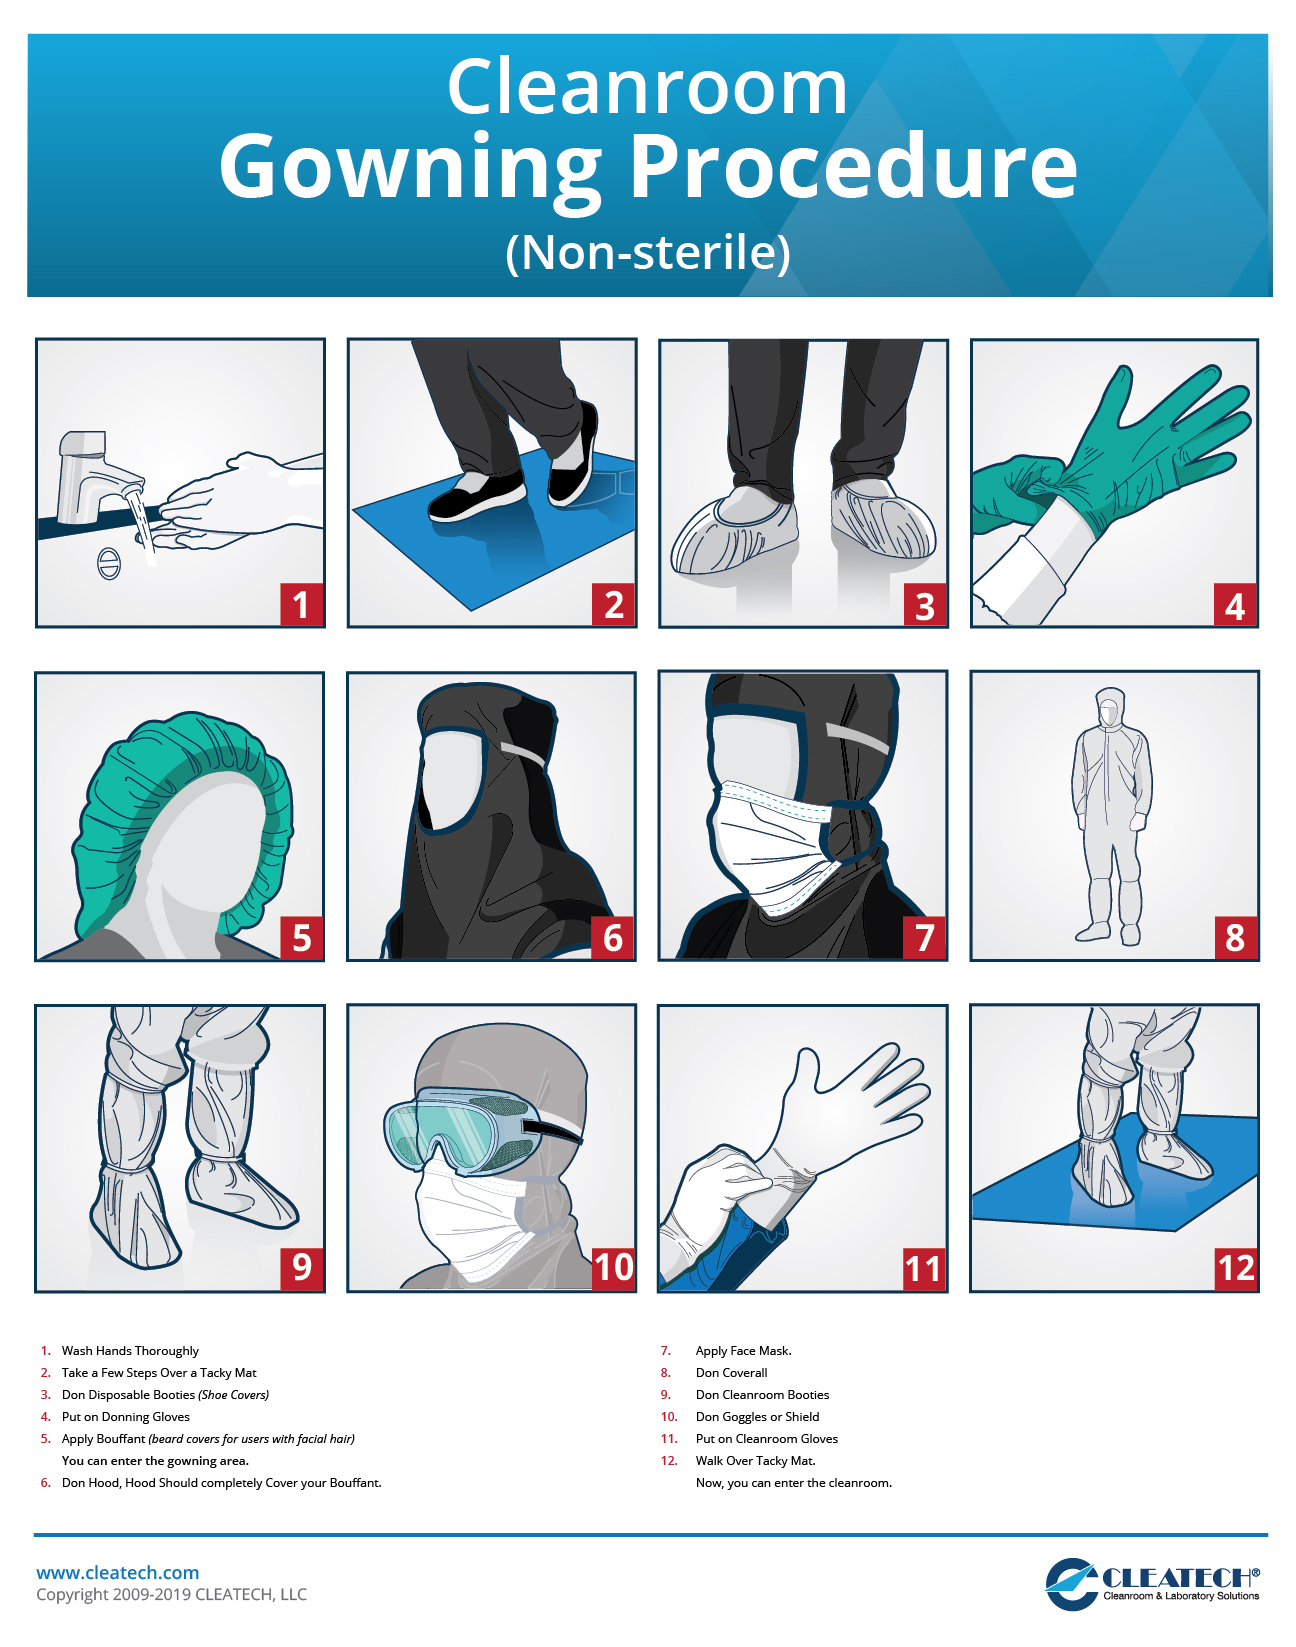 Basic Cleanroom Gowning Procedure Poster